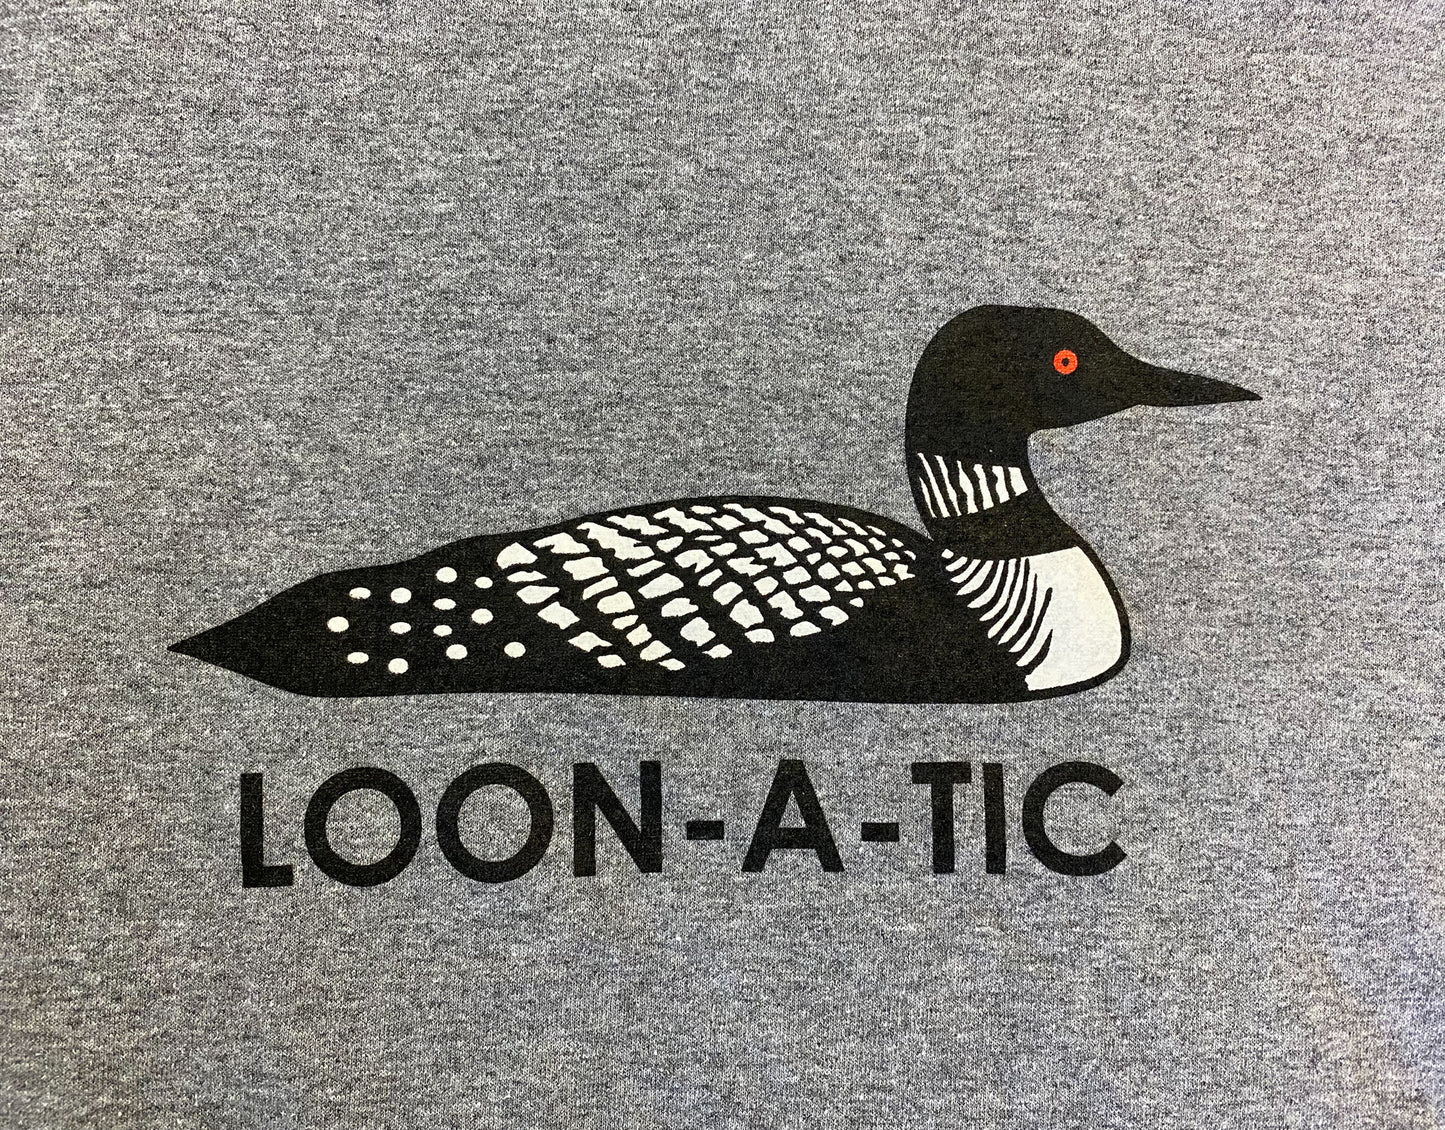 Clearance Sale! Loon-a-Tic Heather Gray cotton blend T-Shirt